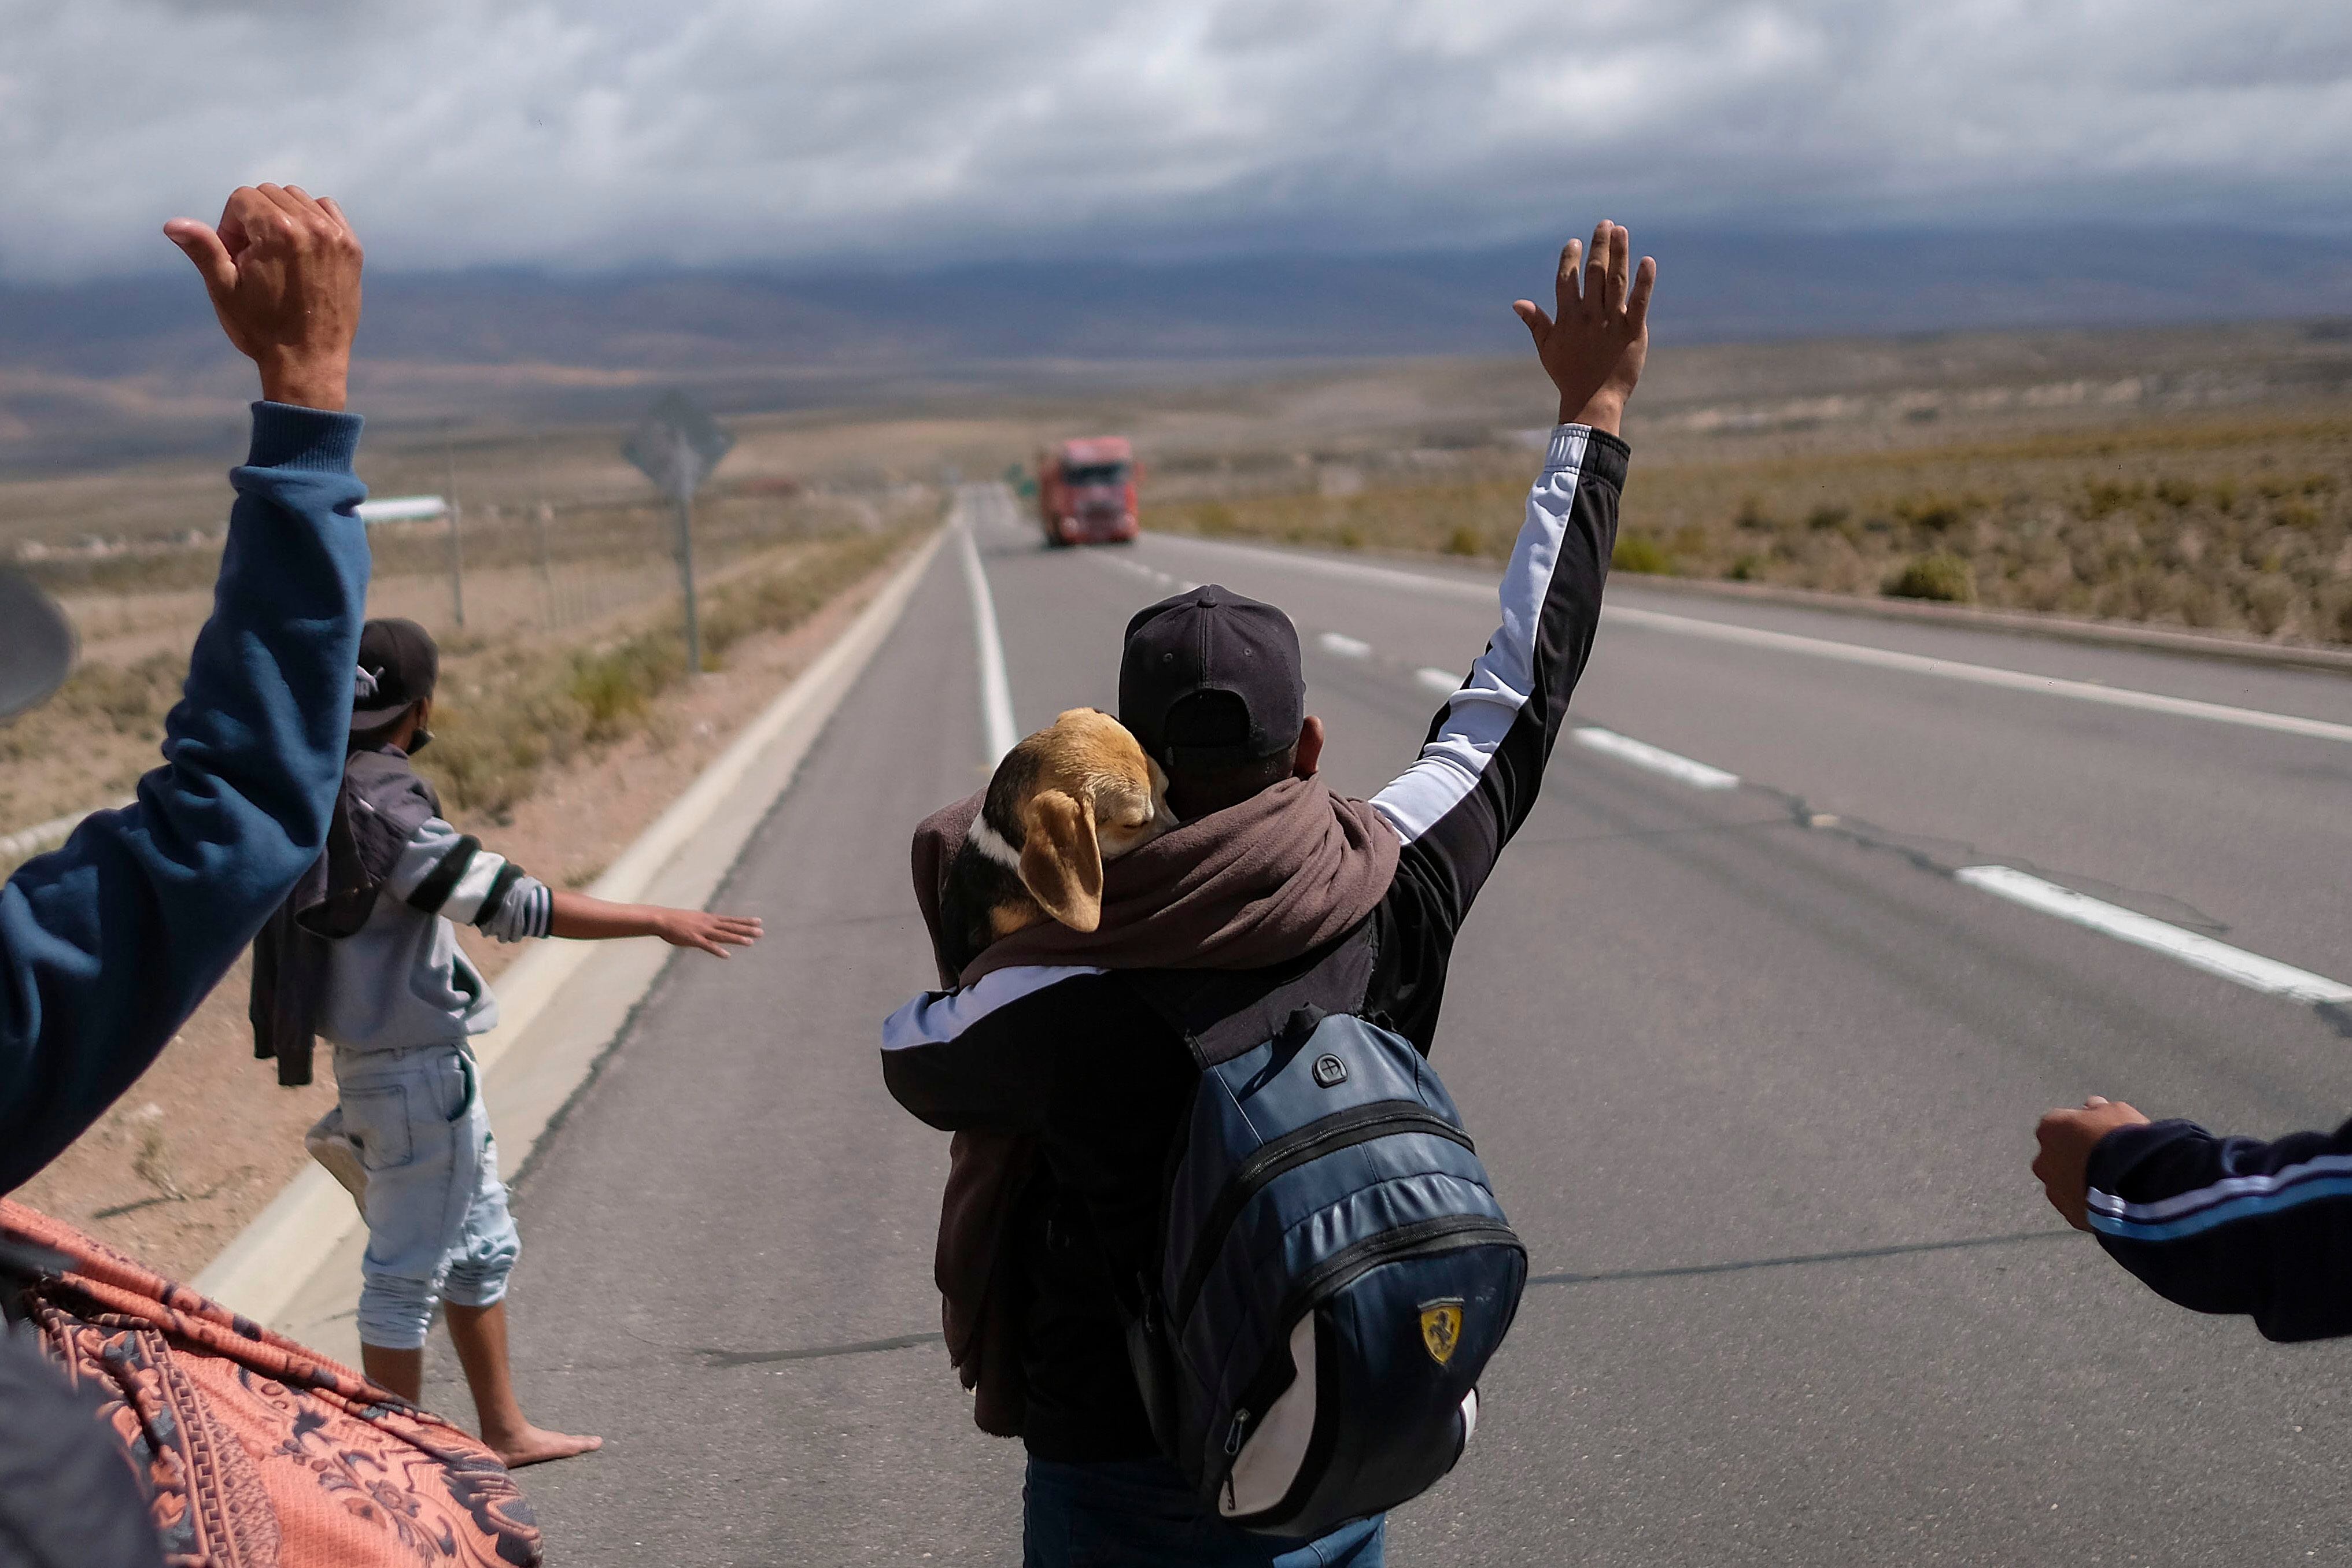 A Venezuelan migrant holds his dog as he tries to hitch a ride to Iquique, on a highway between Huara and Colchane, Chile, Friday, Dec. 10, 2021. (AP Photo/Matias Delacroix)